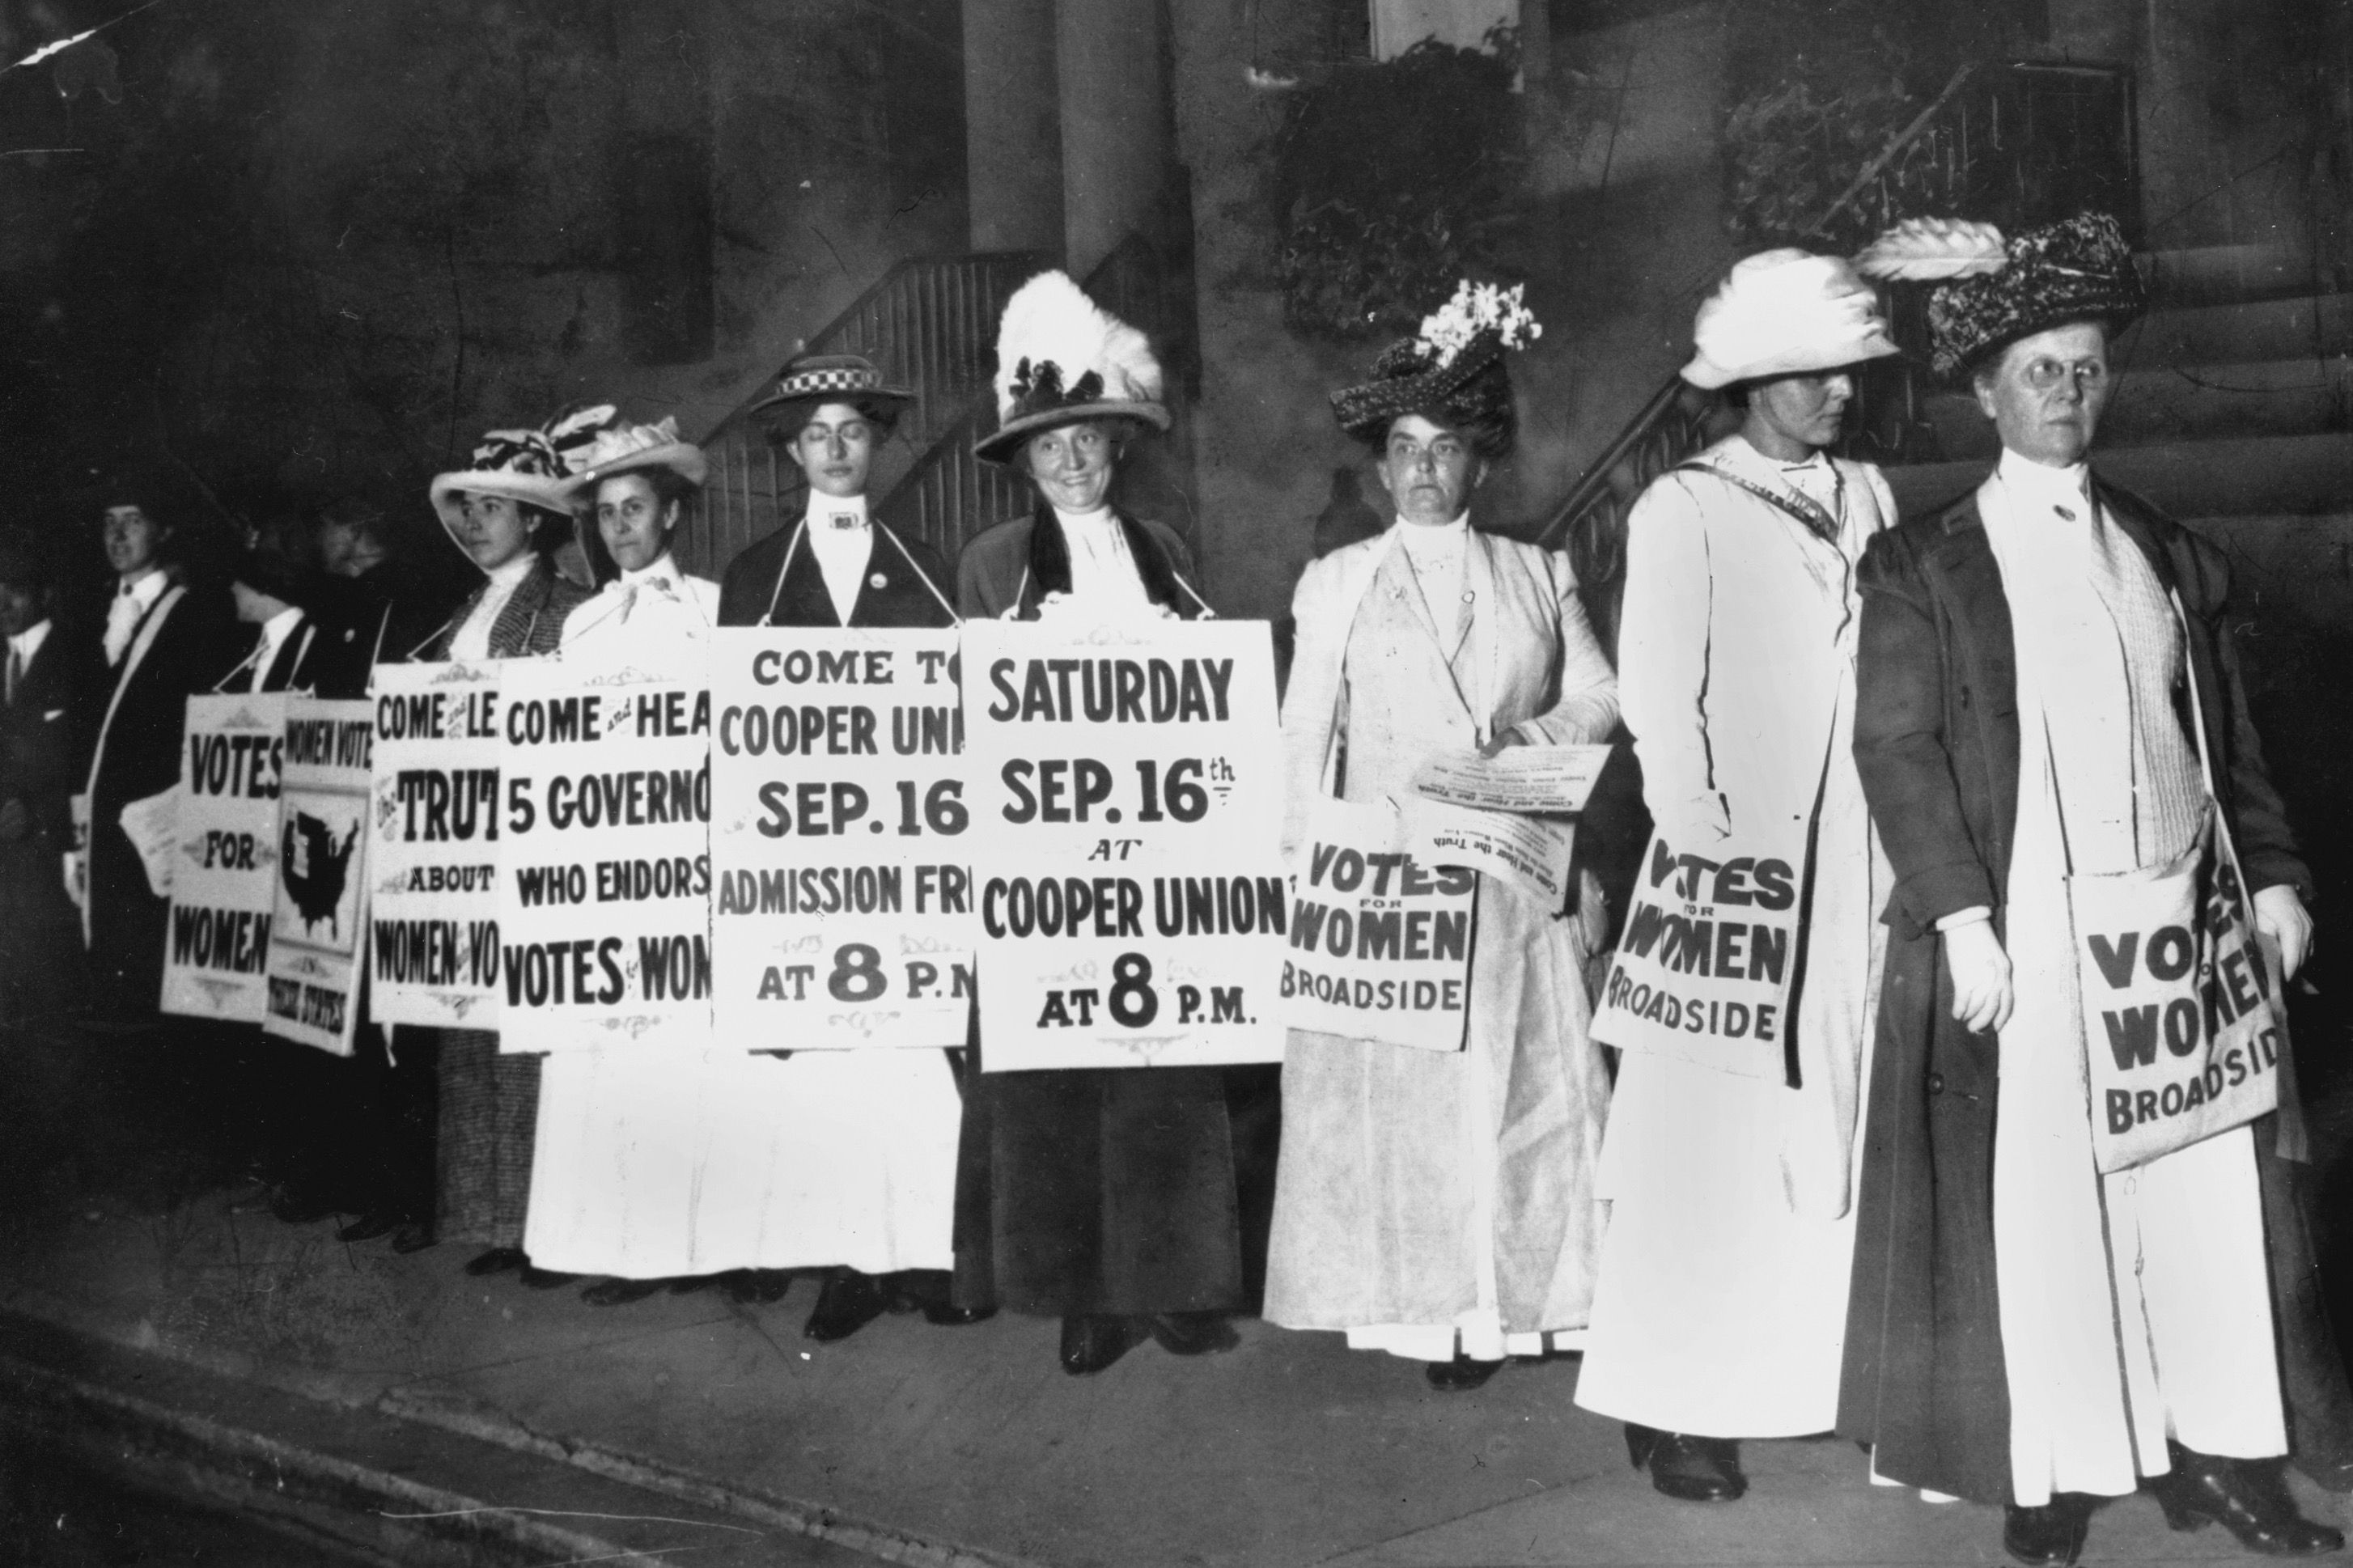 Hard won, but not over: Votes women fight for gender equality 100 years later - al.com